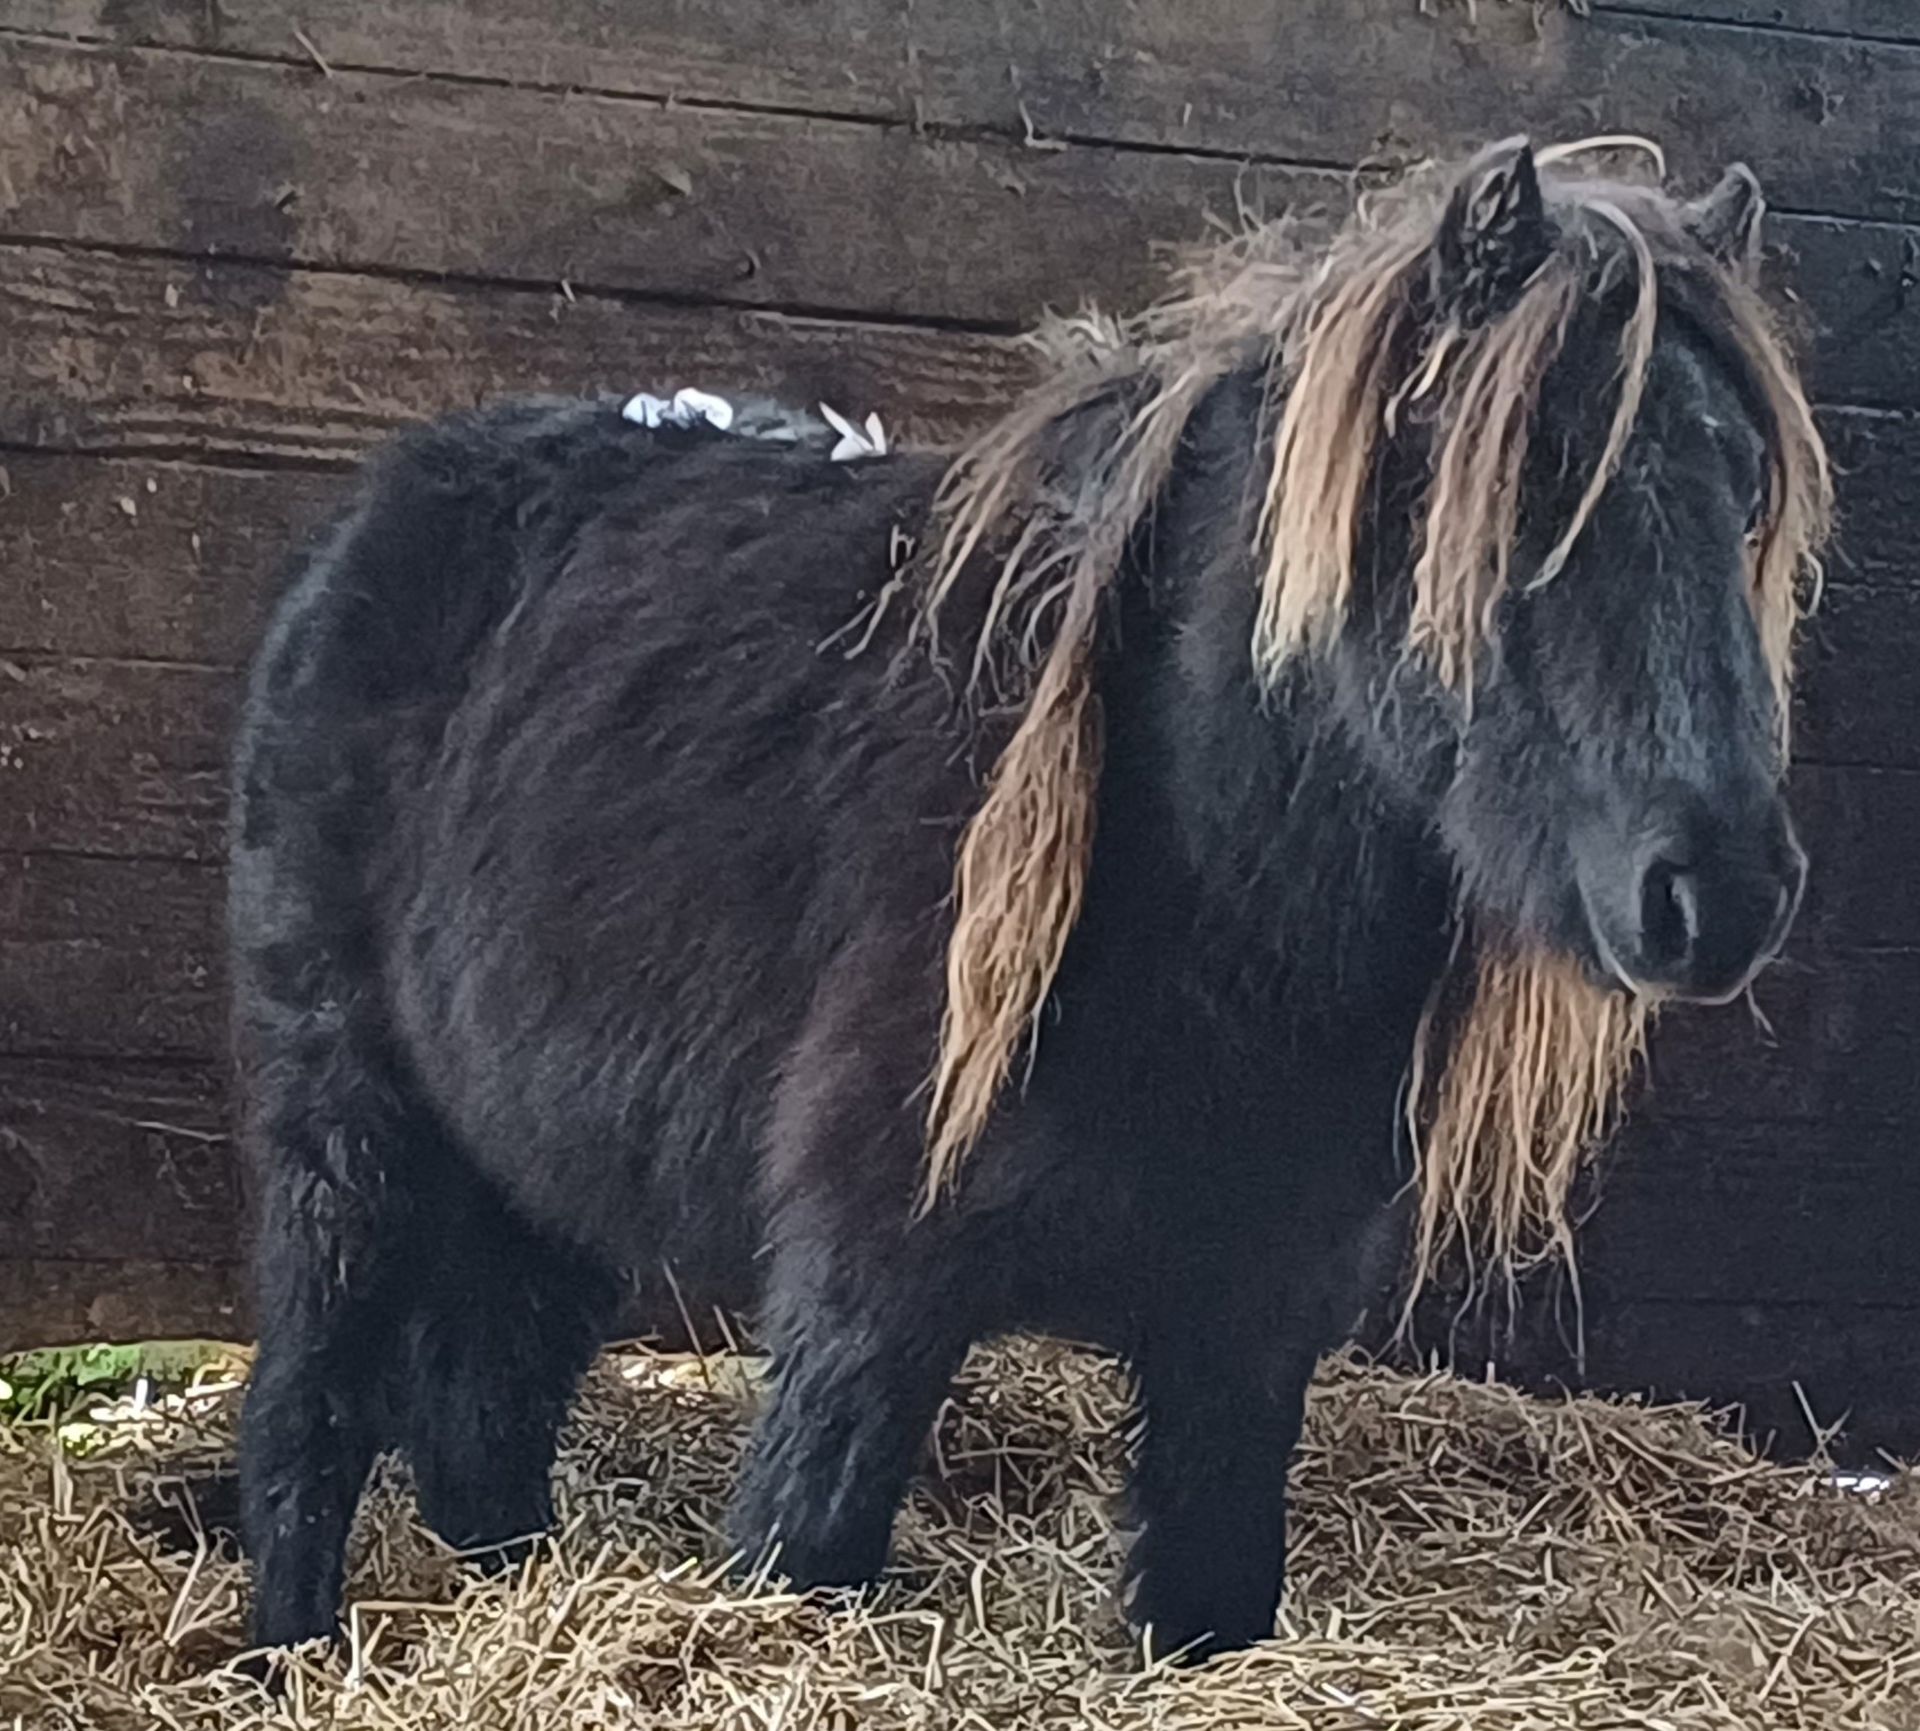 'VIXEN LILLIBET' SHETLAND BLACK MARE BELIEVED TO BE 10 YEARS +